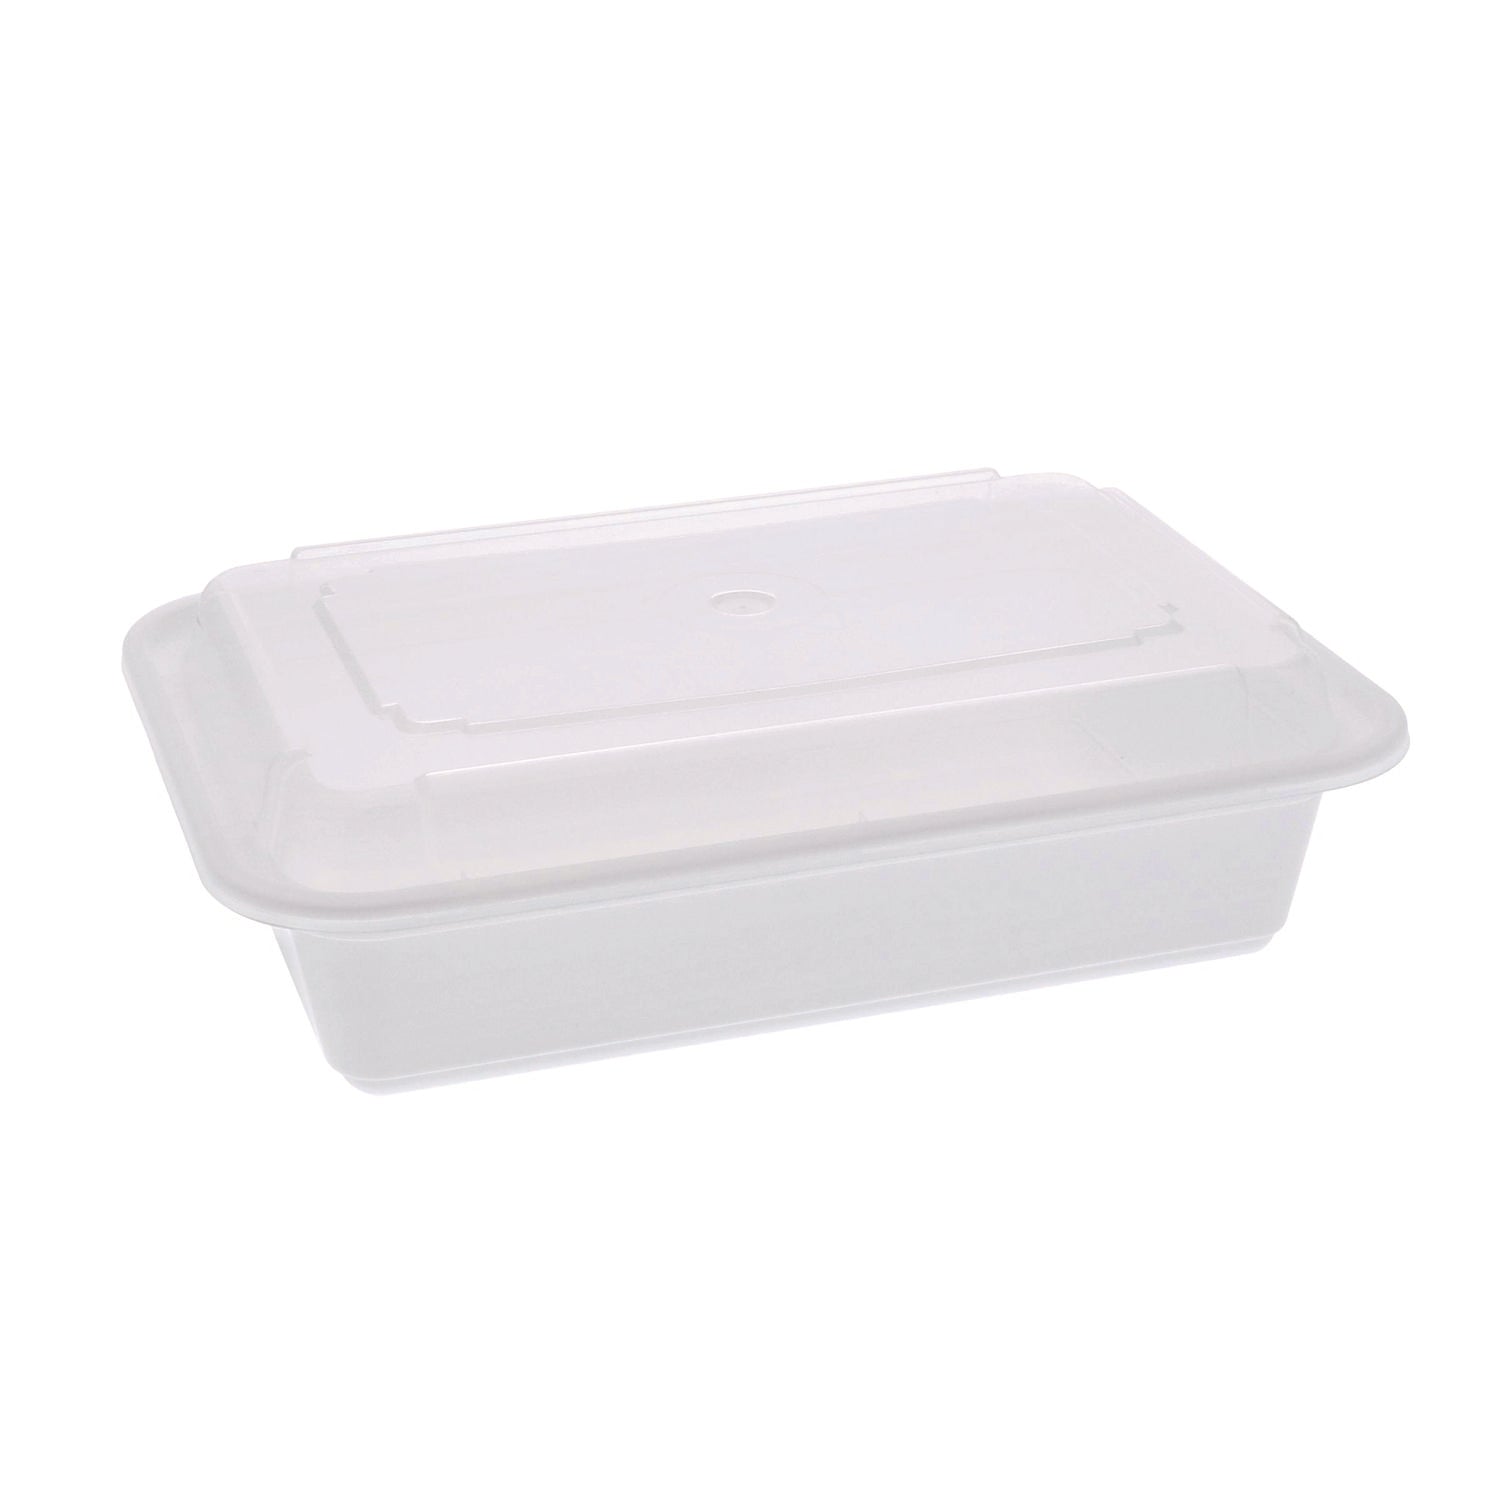 newspring-versatainer-microwavable-containers-88-x-6-x-25-white-clear-base-lid-combo-150-carton_pctnc888 - 1